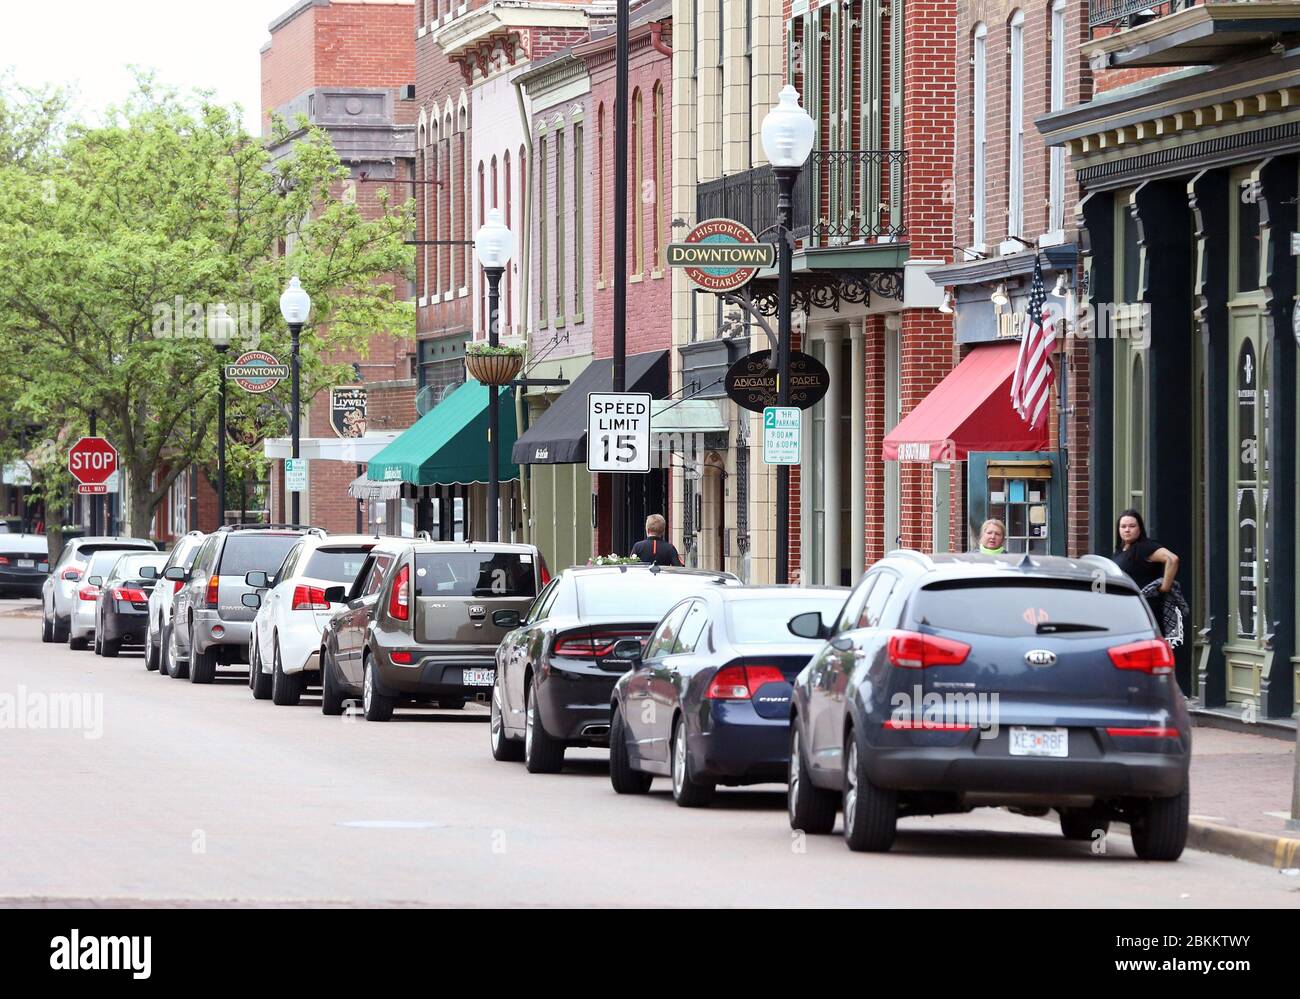 St. Charles, United States. 04th May, 2020. Parked cars now line the historic Main Street in St. Charles, Missouri on Monday, May 4, 2020. Several businesses have reopened after being closed for nearly two months by an emergency state order, due to coronavirus fears. Photo by Bill Greenblatt/UPI Credit: UPI/Alamy Live News Stock Photo